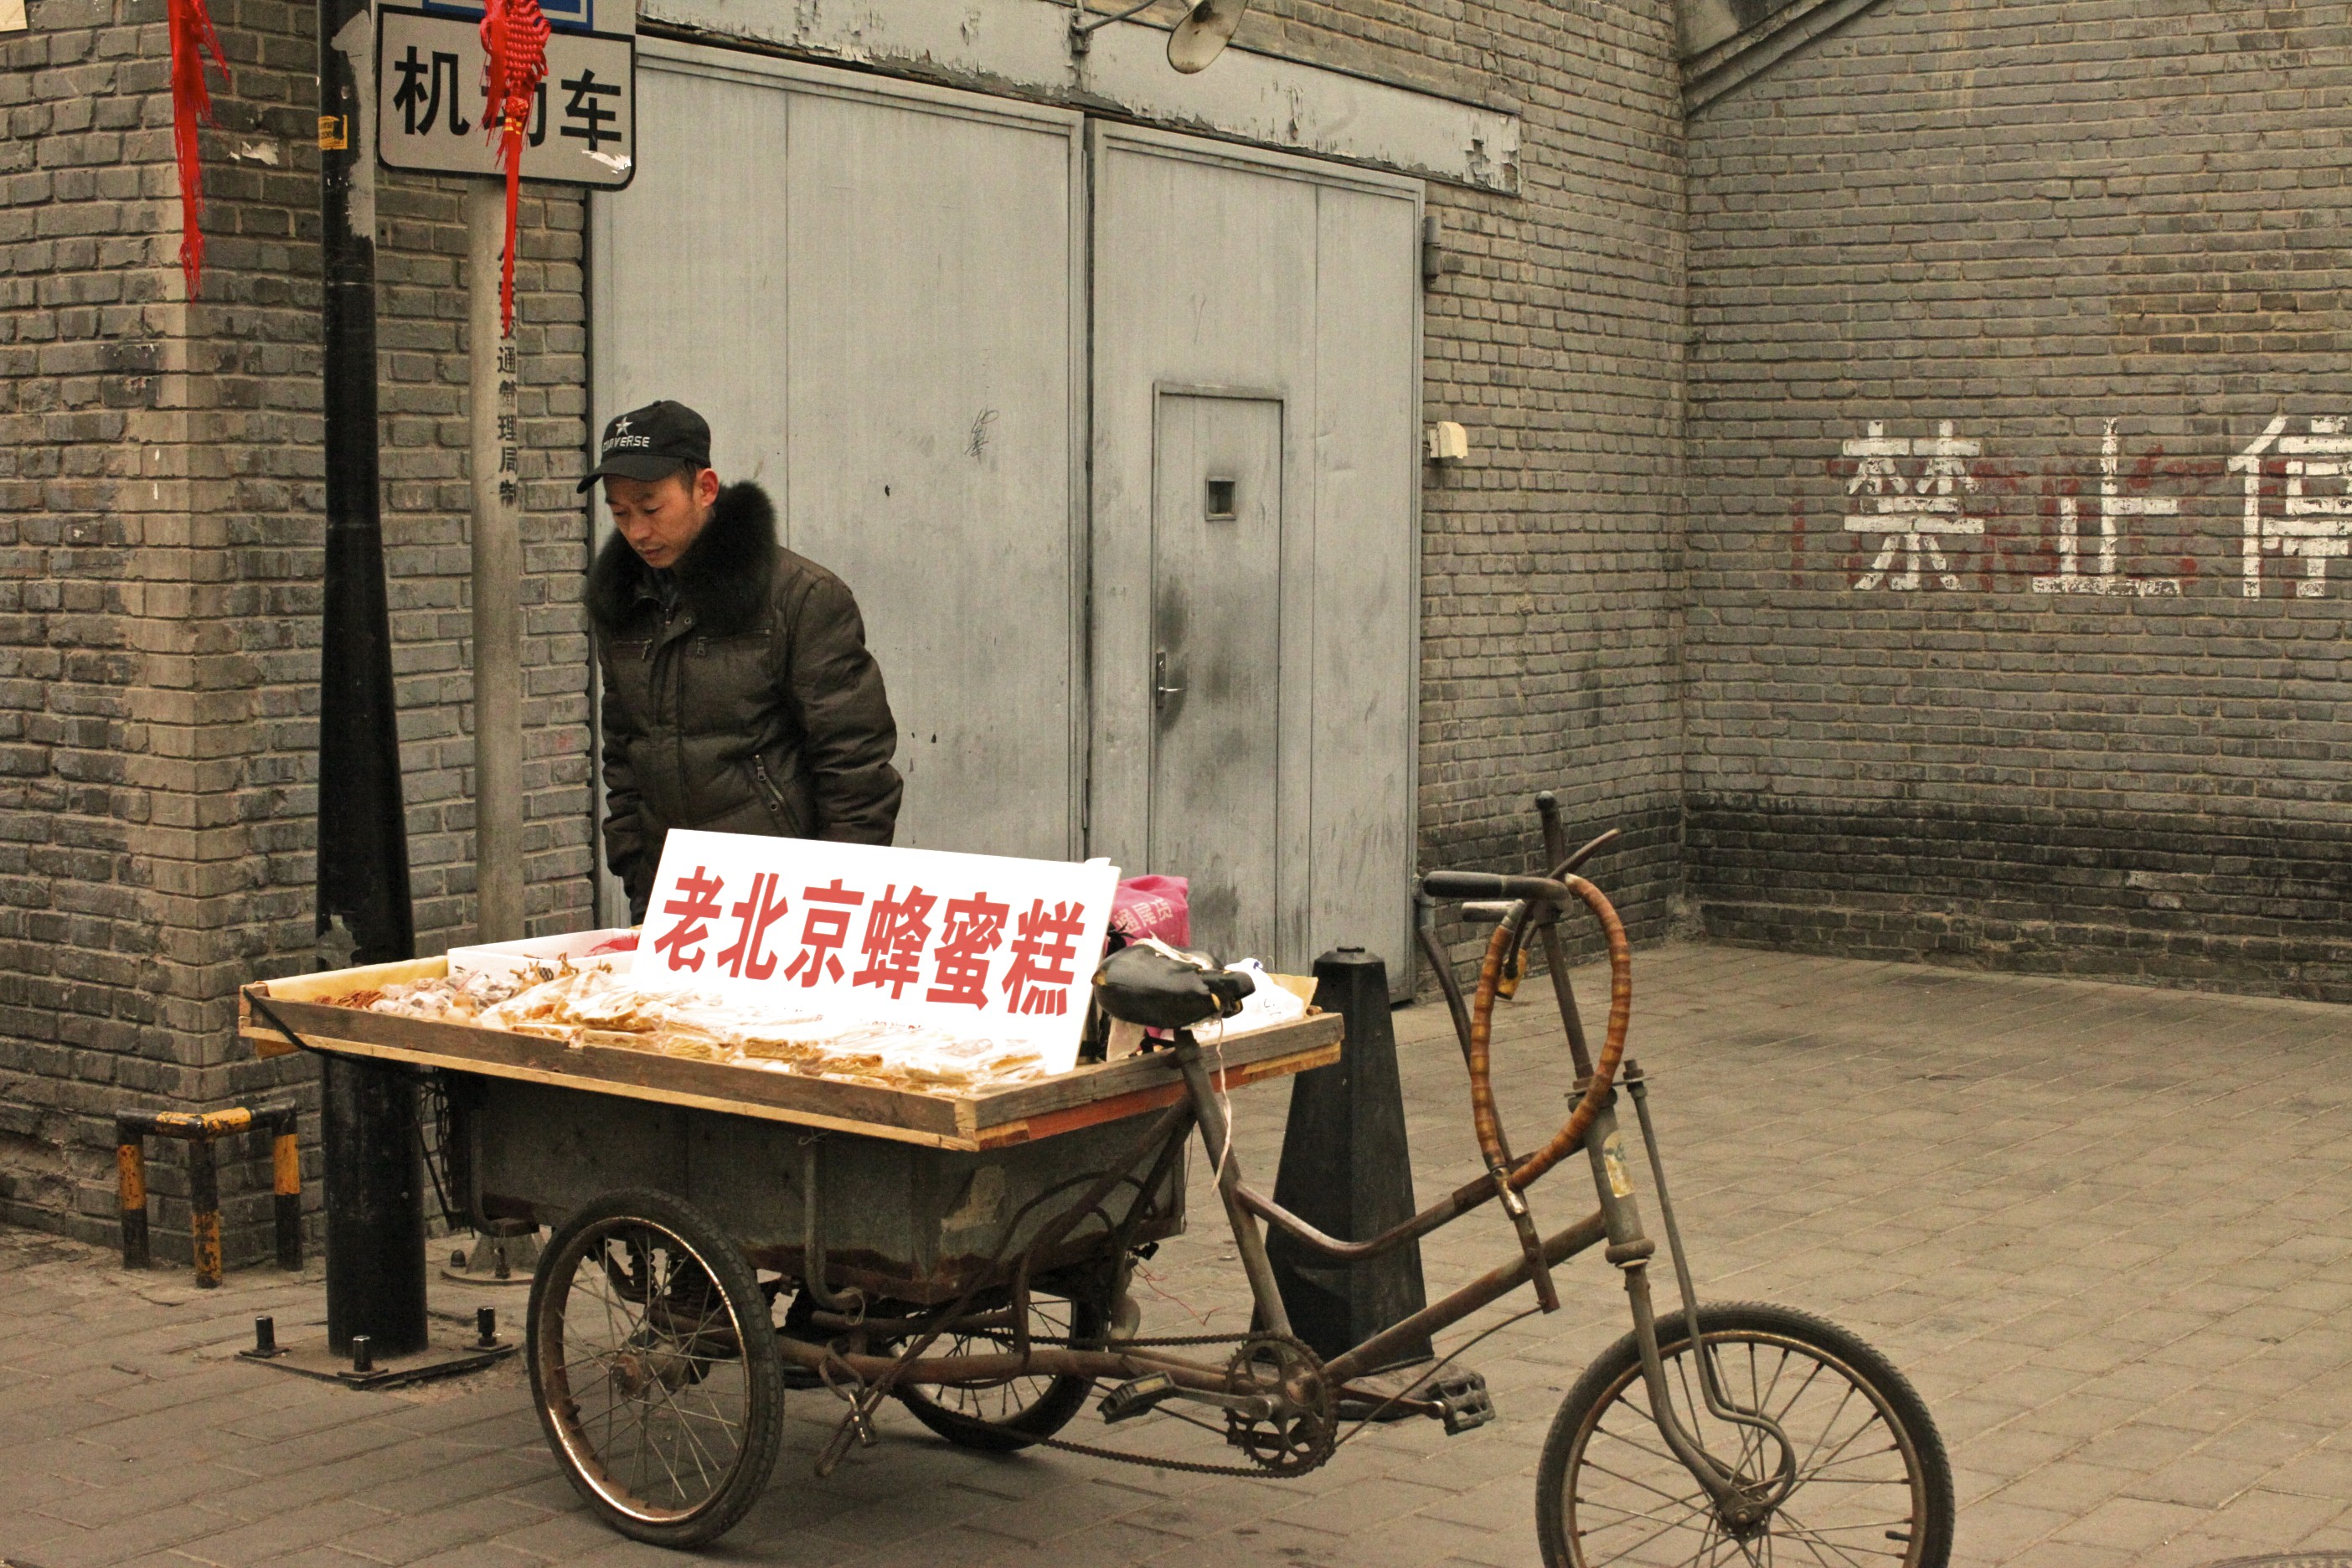 Life in a Hutong